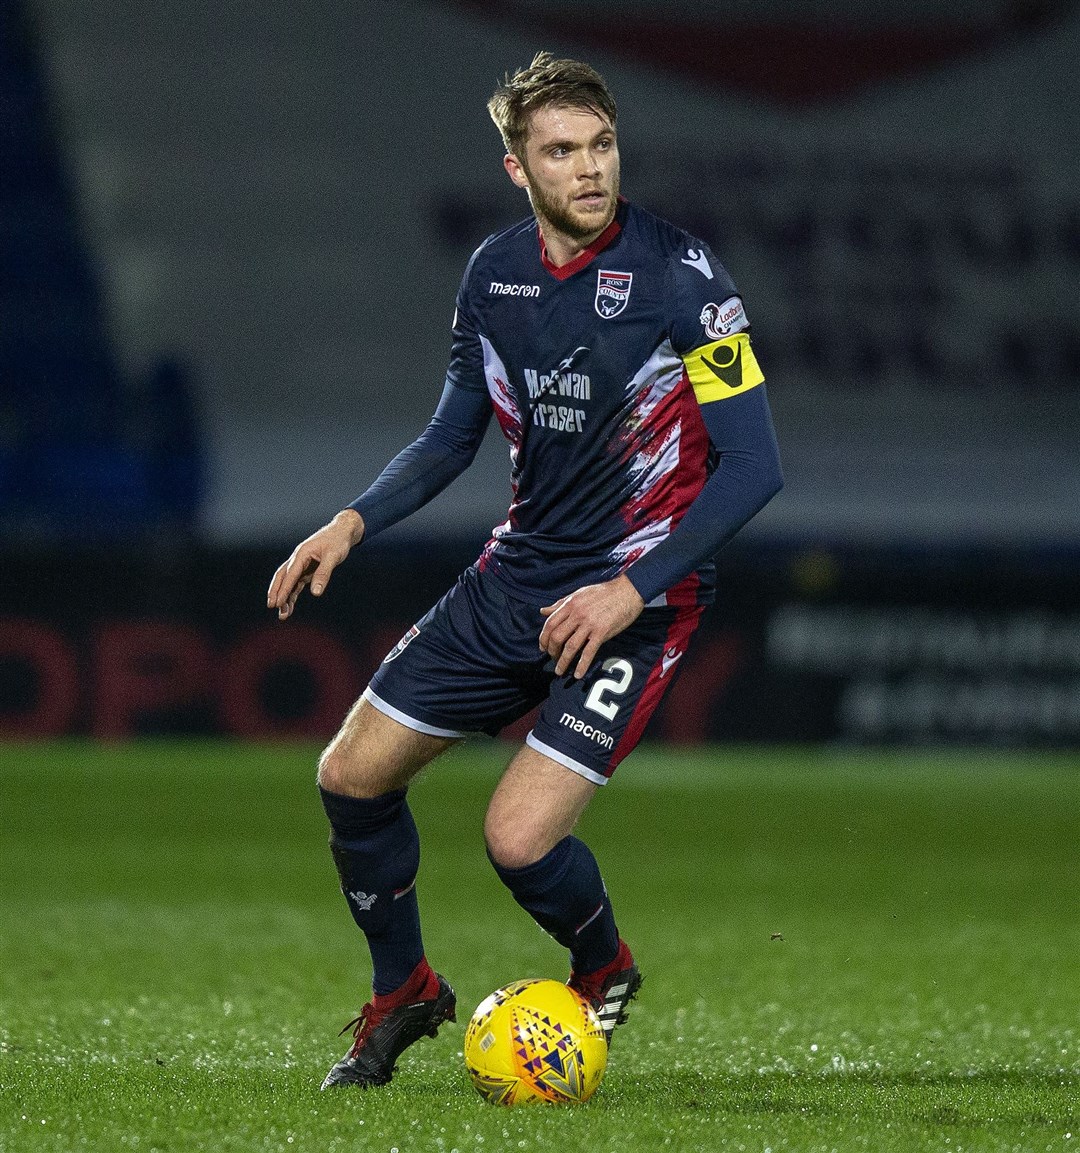 Marcus Fraser insisted he never touched Liam Millar in a tackle which gave Kilmarnock a penalty.